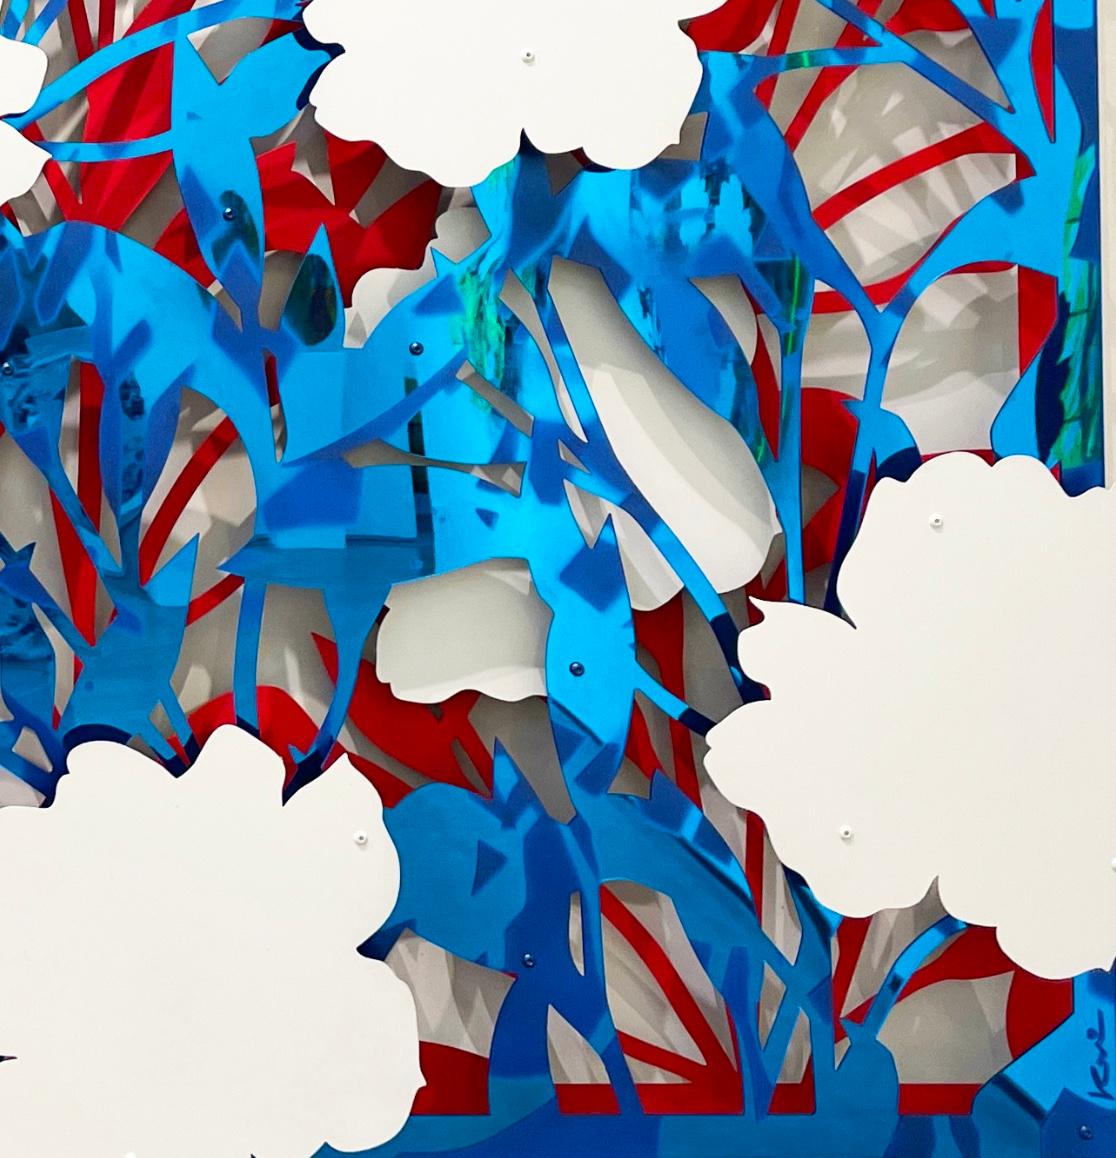 As a sculptor, Kalish primarily works in metal, both in large-scale public installations and limited edition pieces for galleries and private collectors around the globe. Abstract Florals “The Candy Coated Collection” is a multidimensional 17-piece